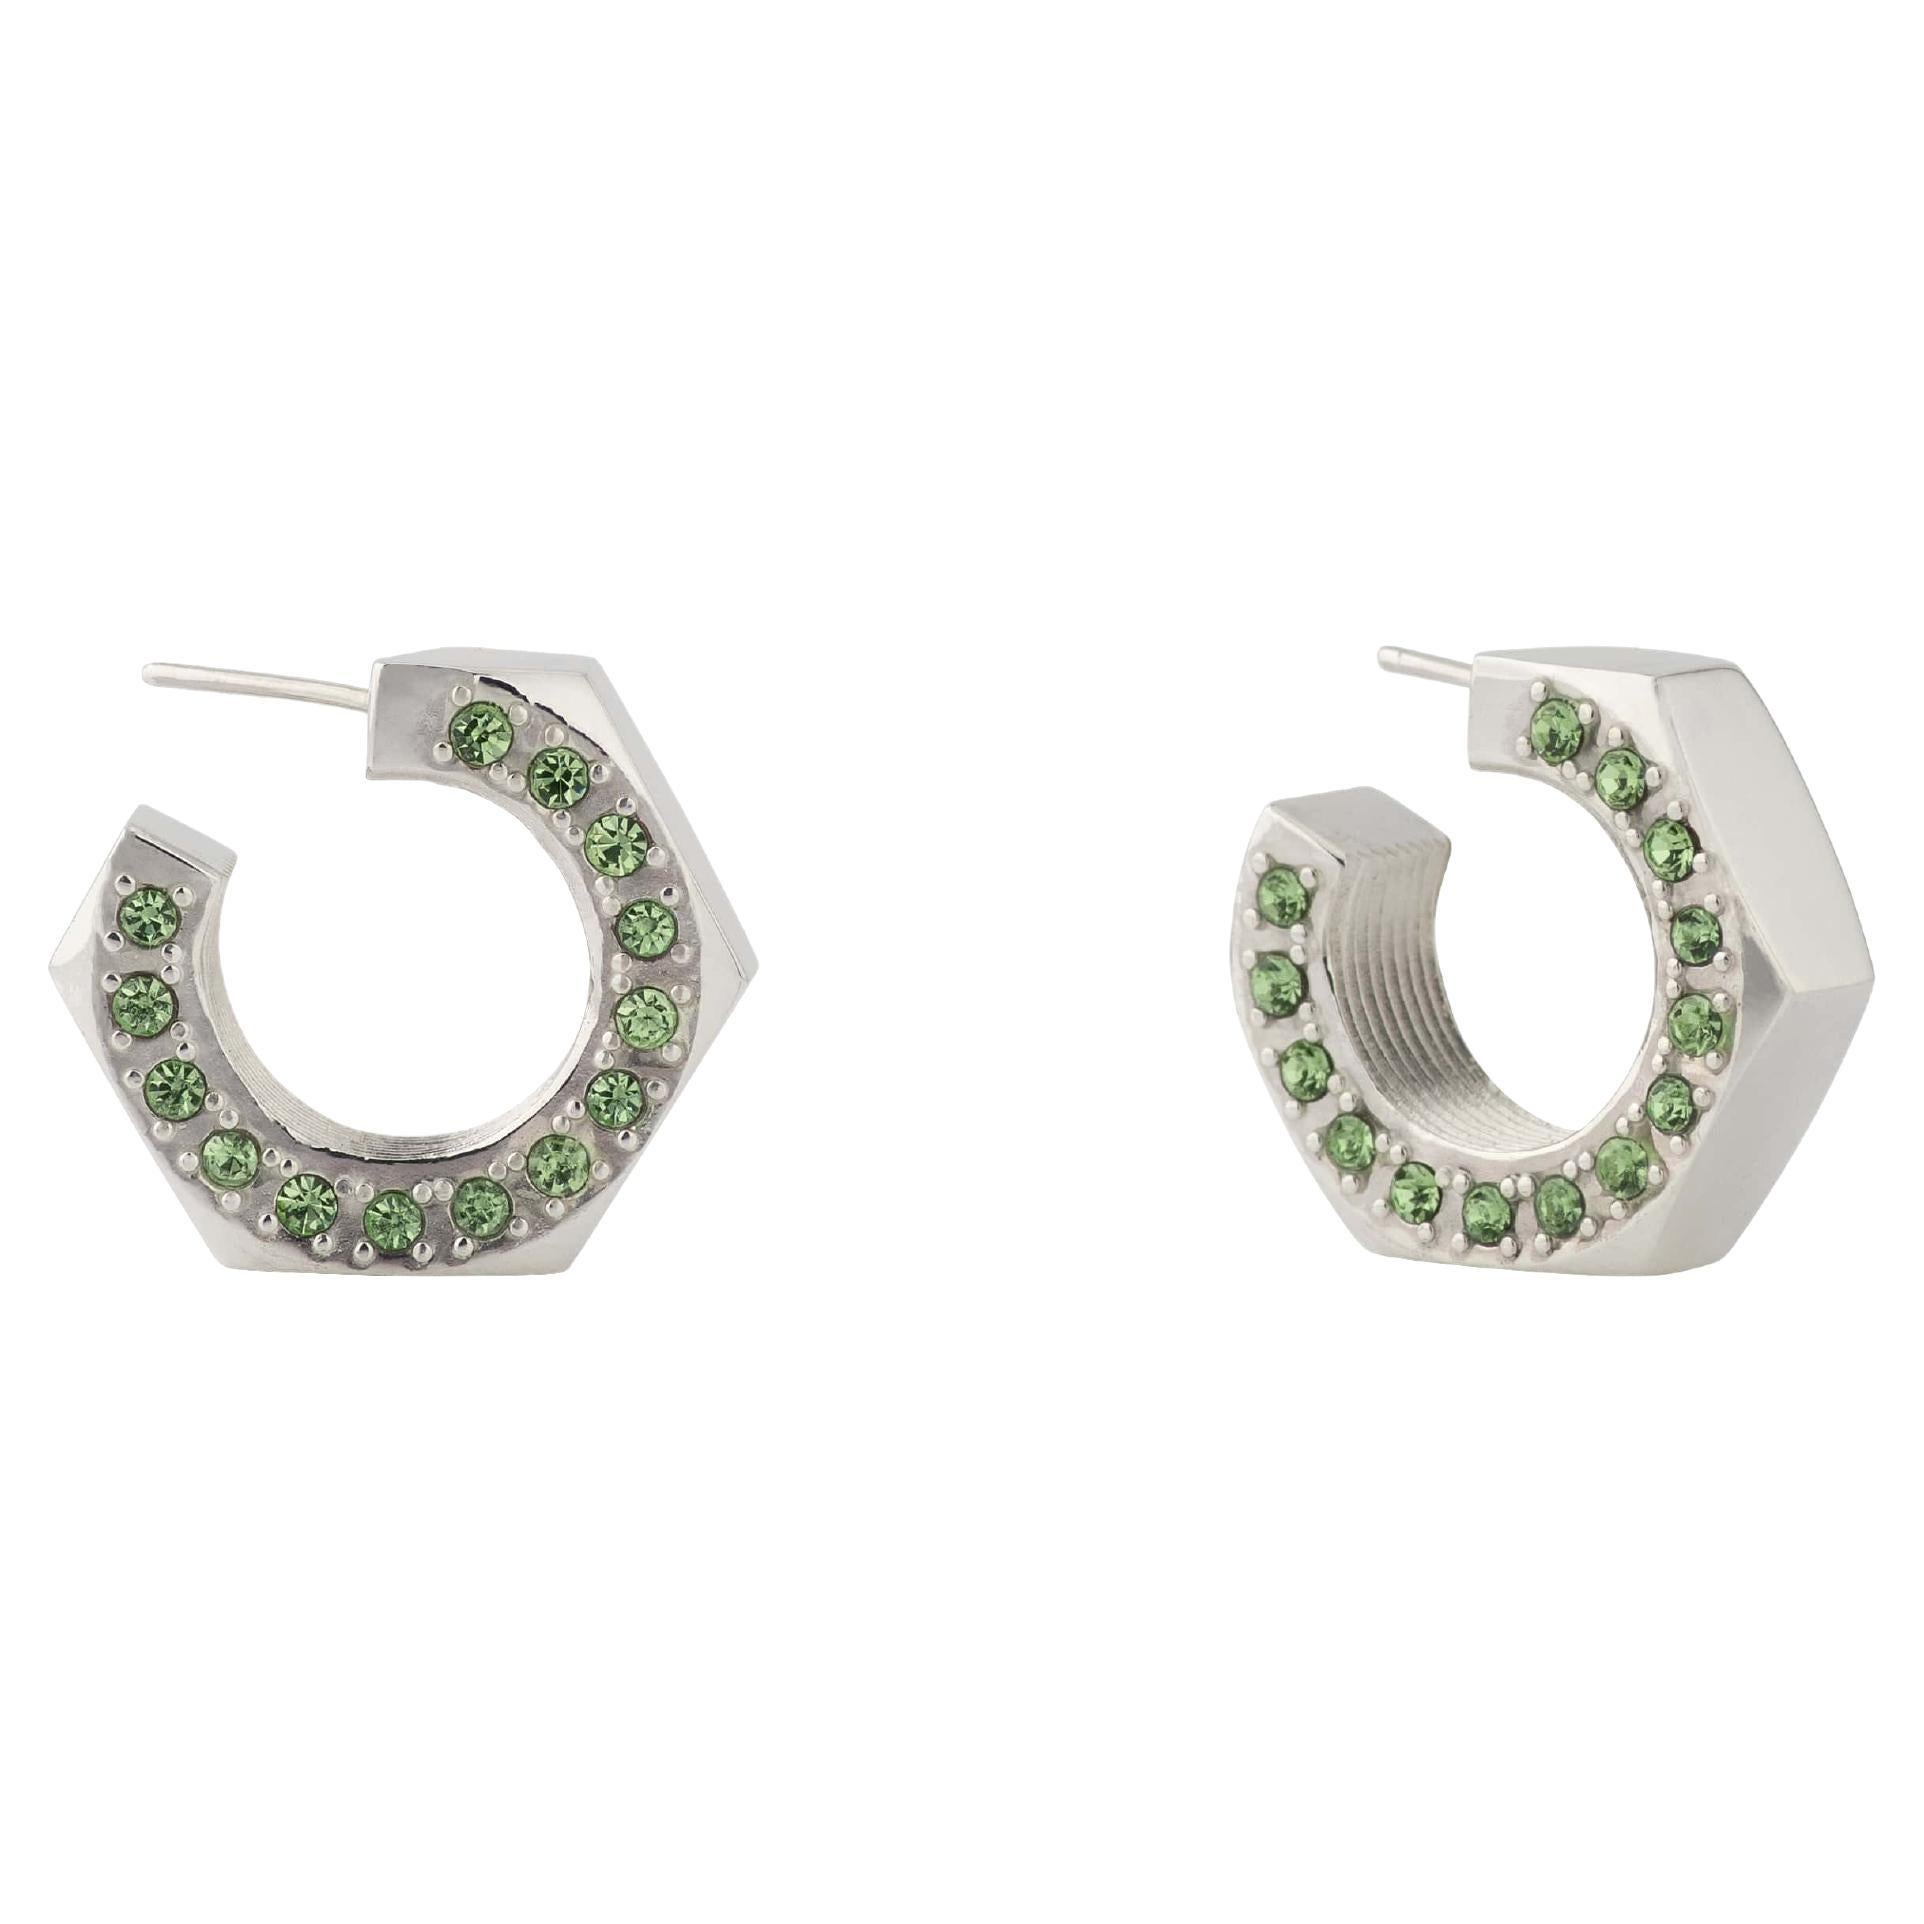 Big Sterling Silver Hoop Earrings with Natural Peridot Stones on the Side